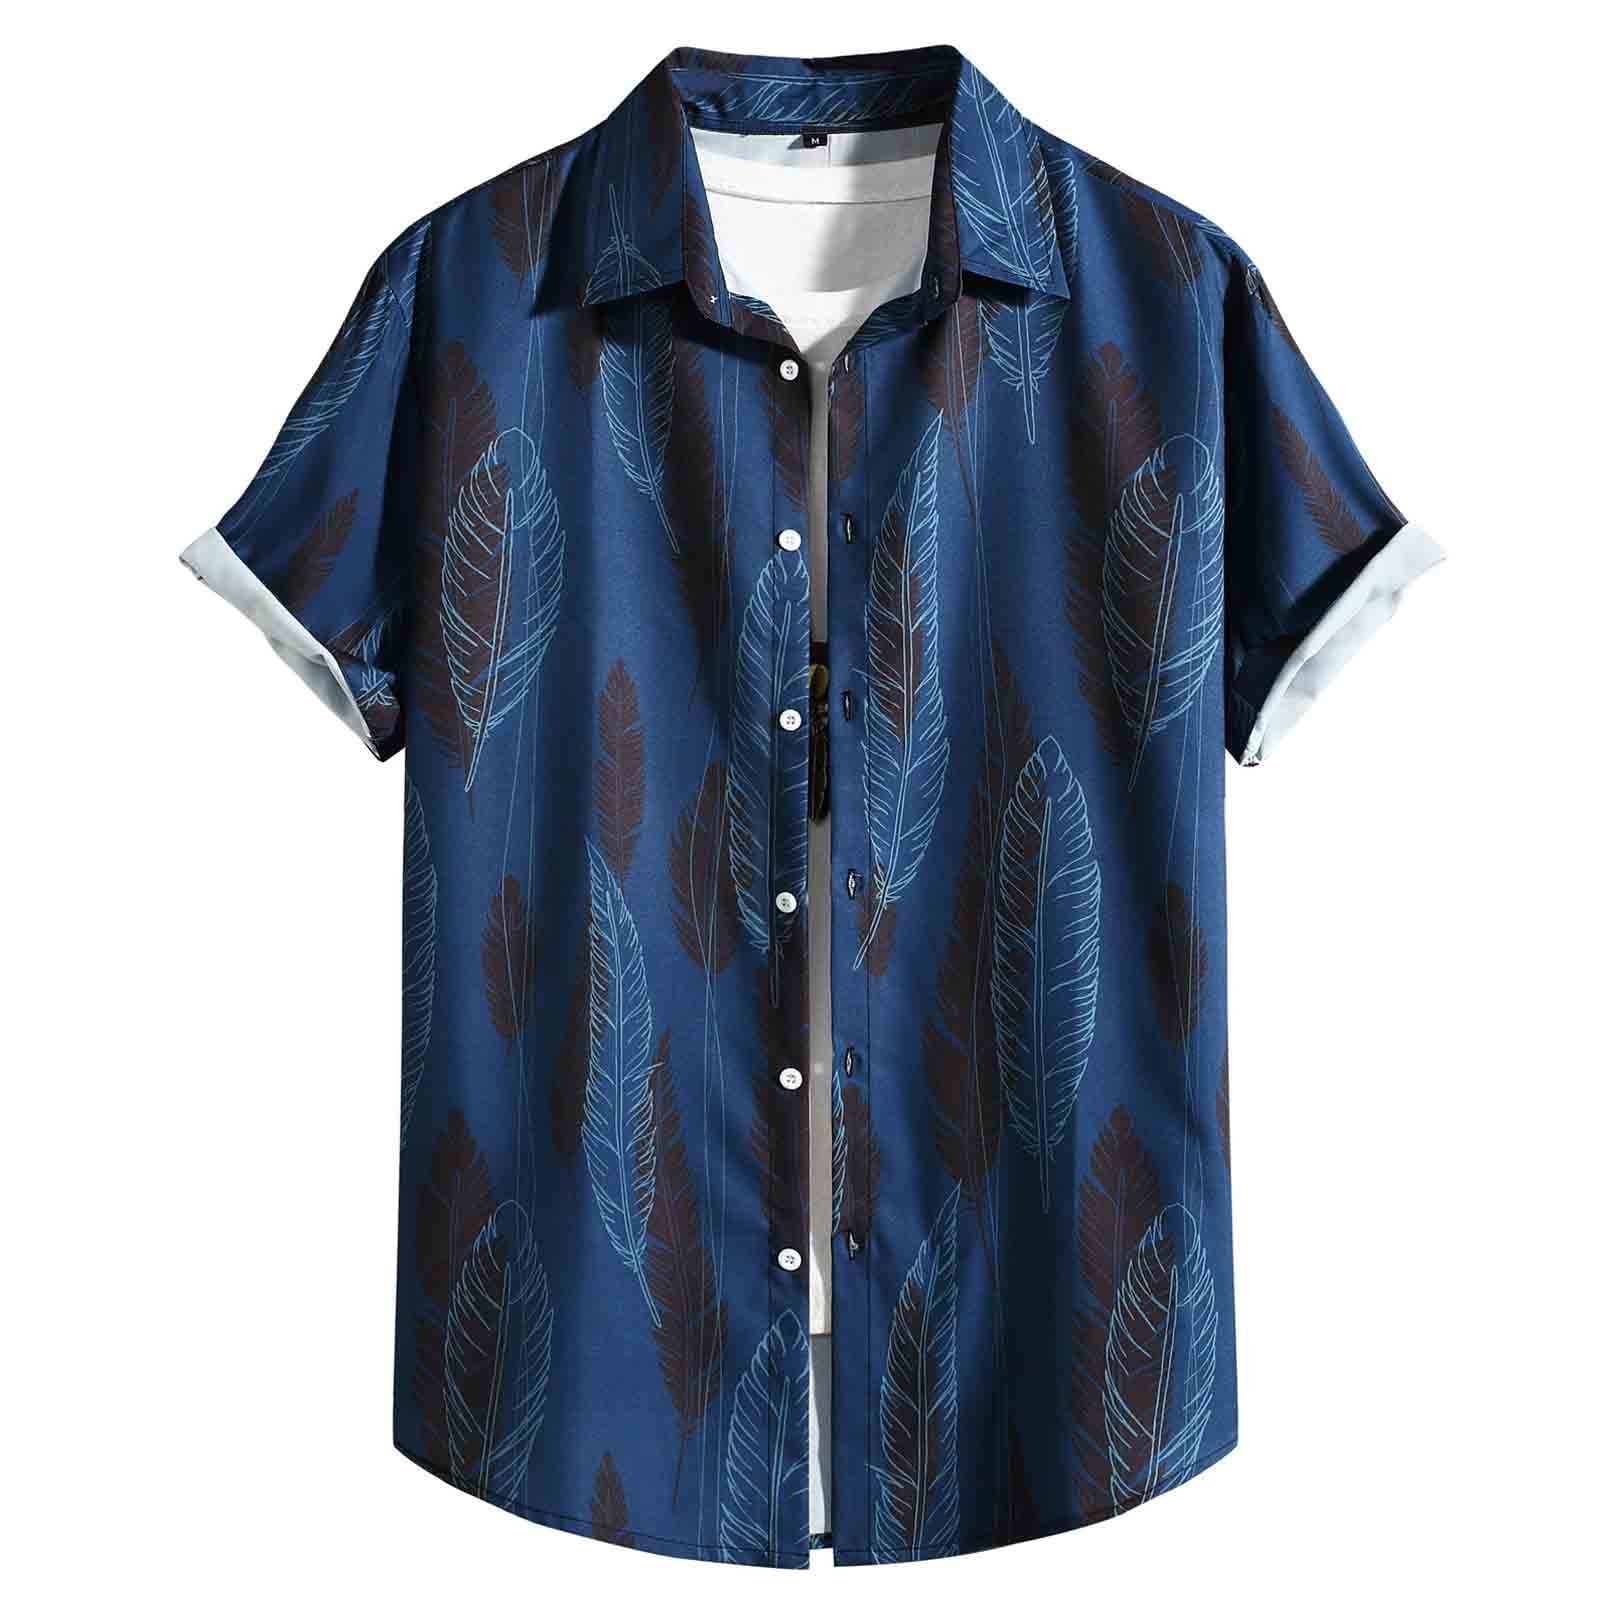 ZCFZJW Hawaiian Shirt for Men Vintage Ethnic Style Print Short Sleeve  Button Down Shirts Aloha Shirt Summer Casual Holiday Funny Party Outfits  Tops Blue XXL 